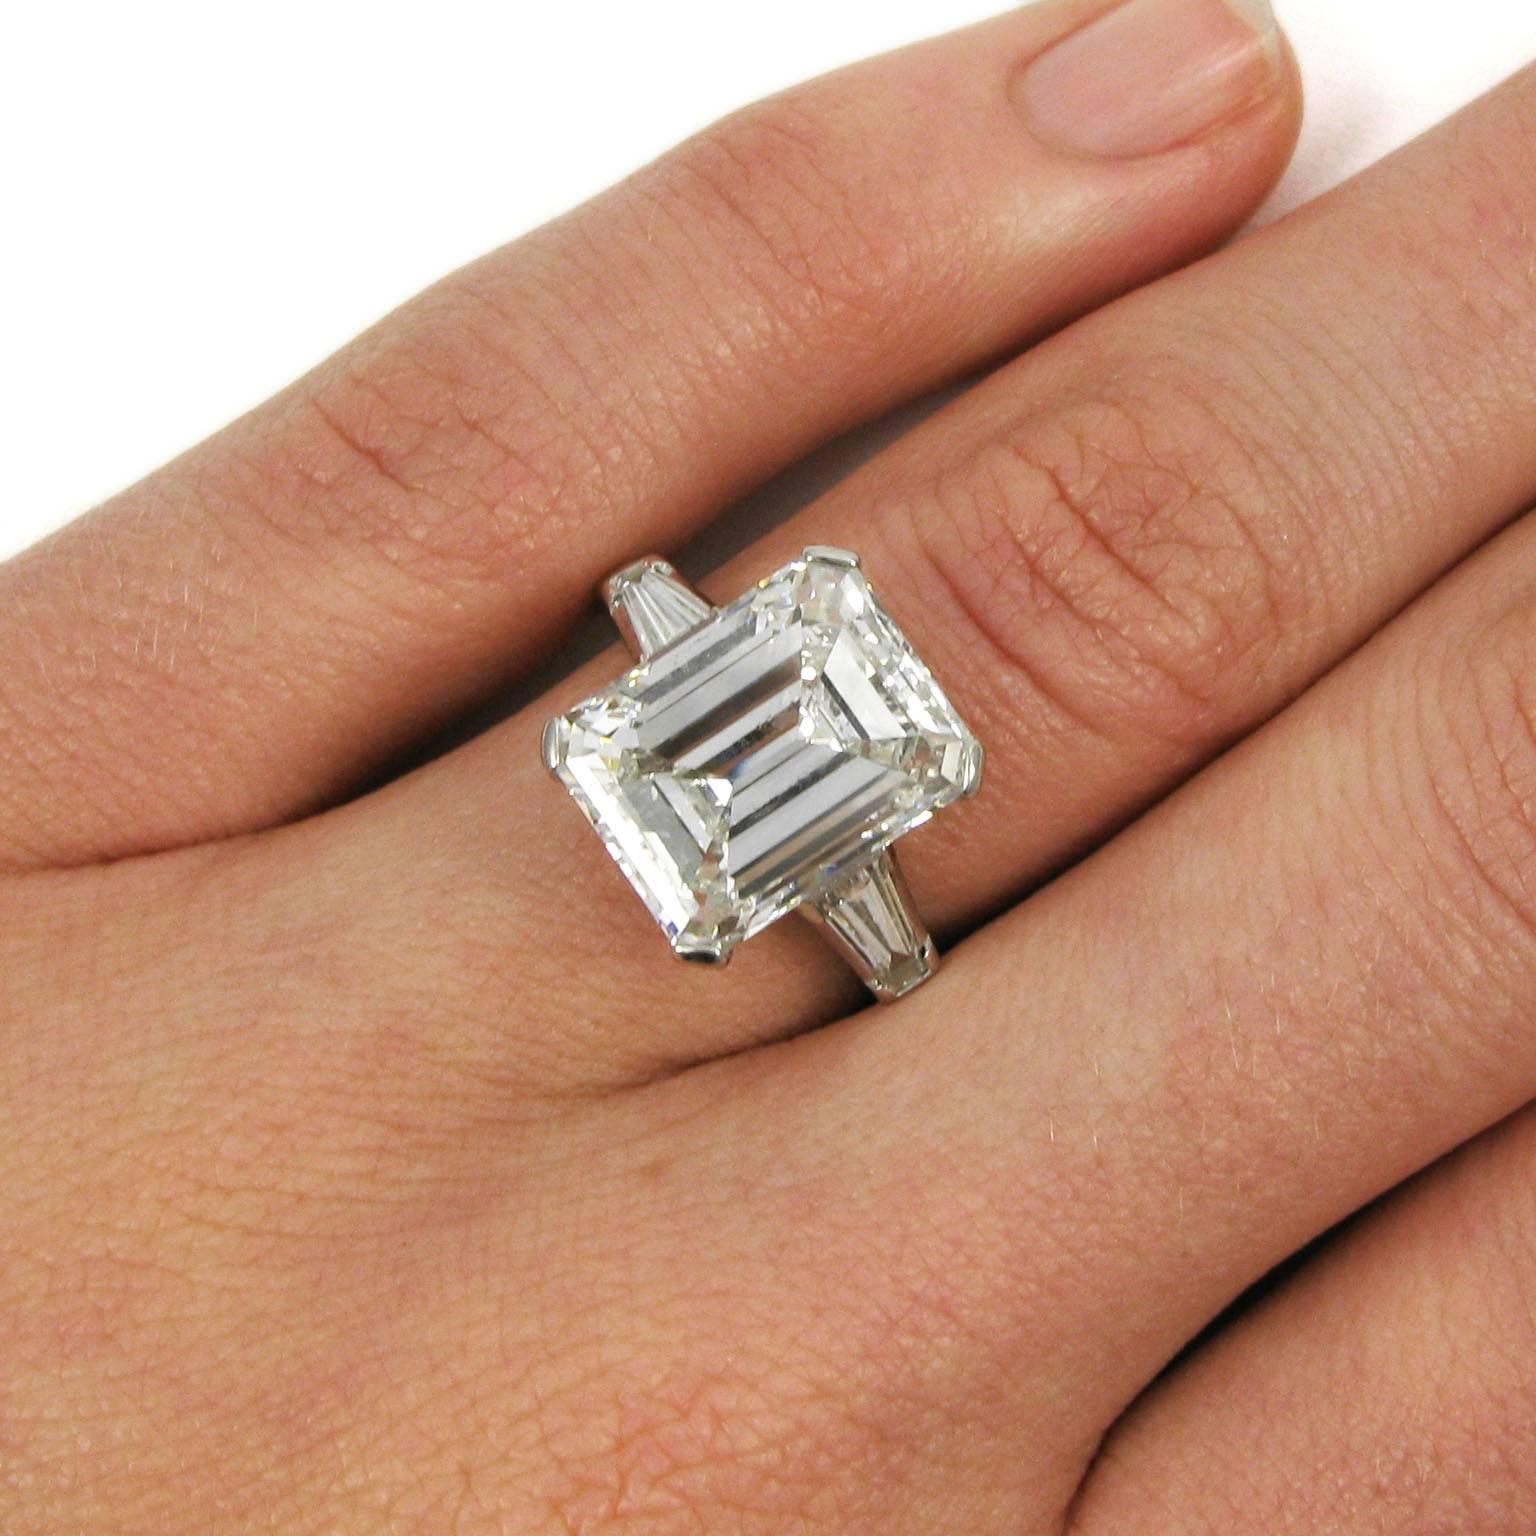 A stunning 7.20 carat emerald-cut J. Birnbach diamond with F color and VVS2 clarity is set into a classic style ring accented by two tapered baguette-cut diamonds totaling approx. 0.90 carat. Mounted in platinum. 

Purchase includes GIA Diamond